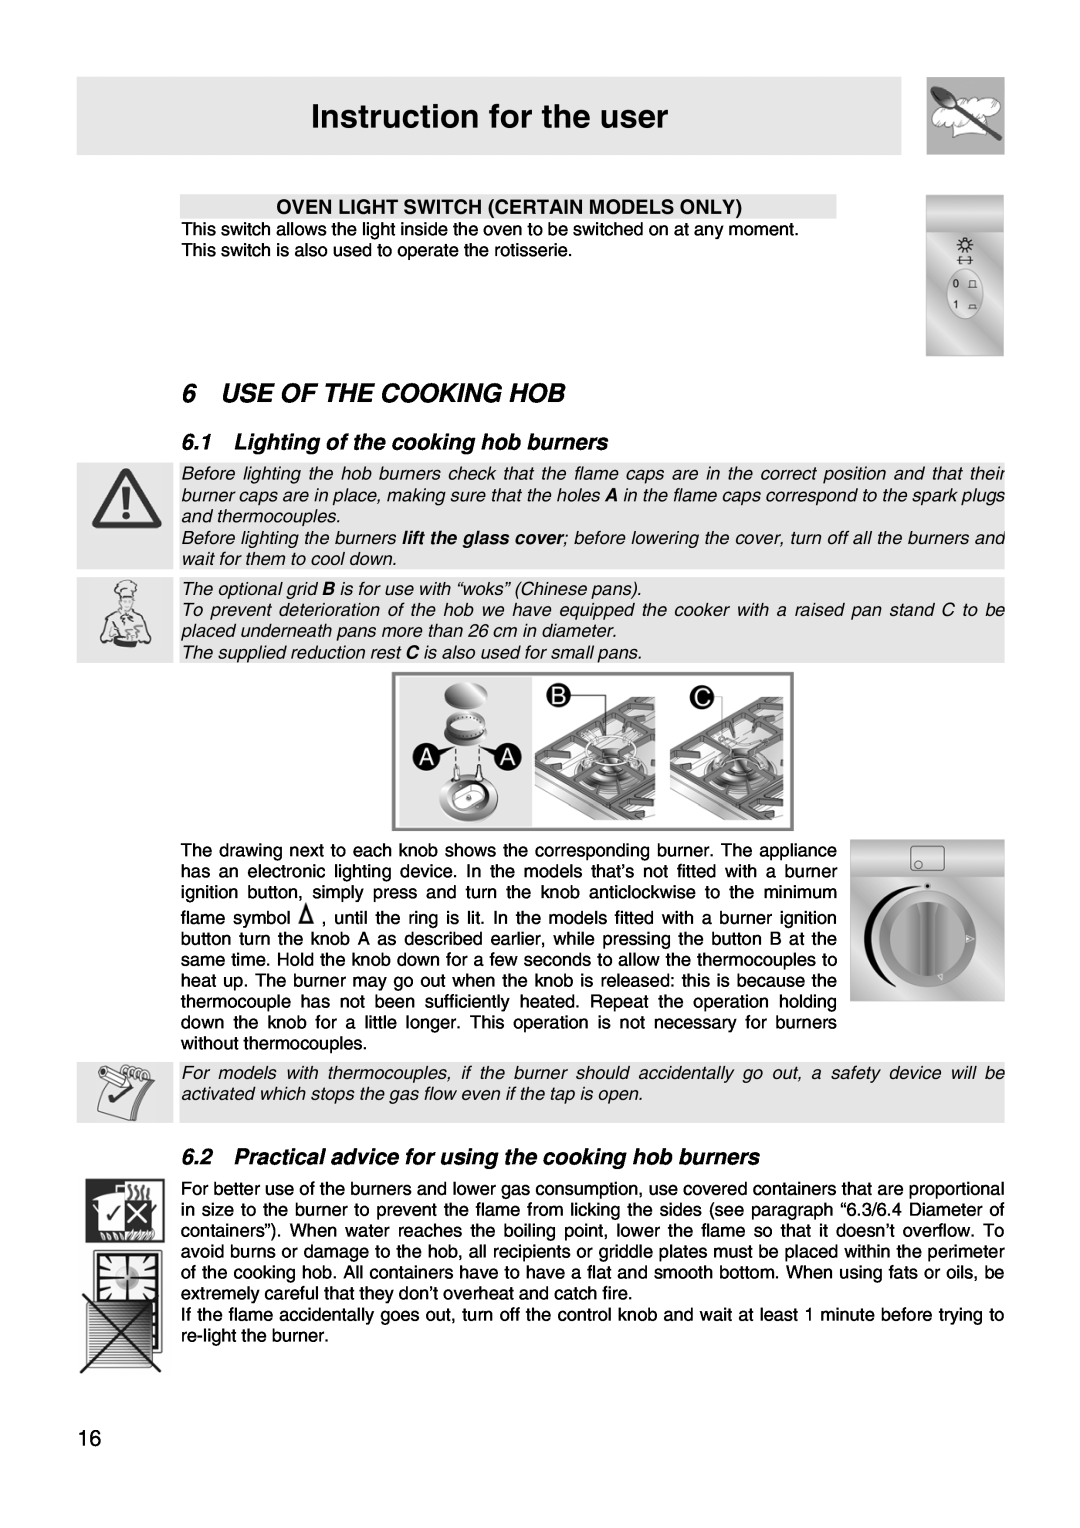 Smeg VA91XVG, VA61XVG manual Use Of The Cooking Hob, Lighting of the cooking hob burners, Instruction for the user 